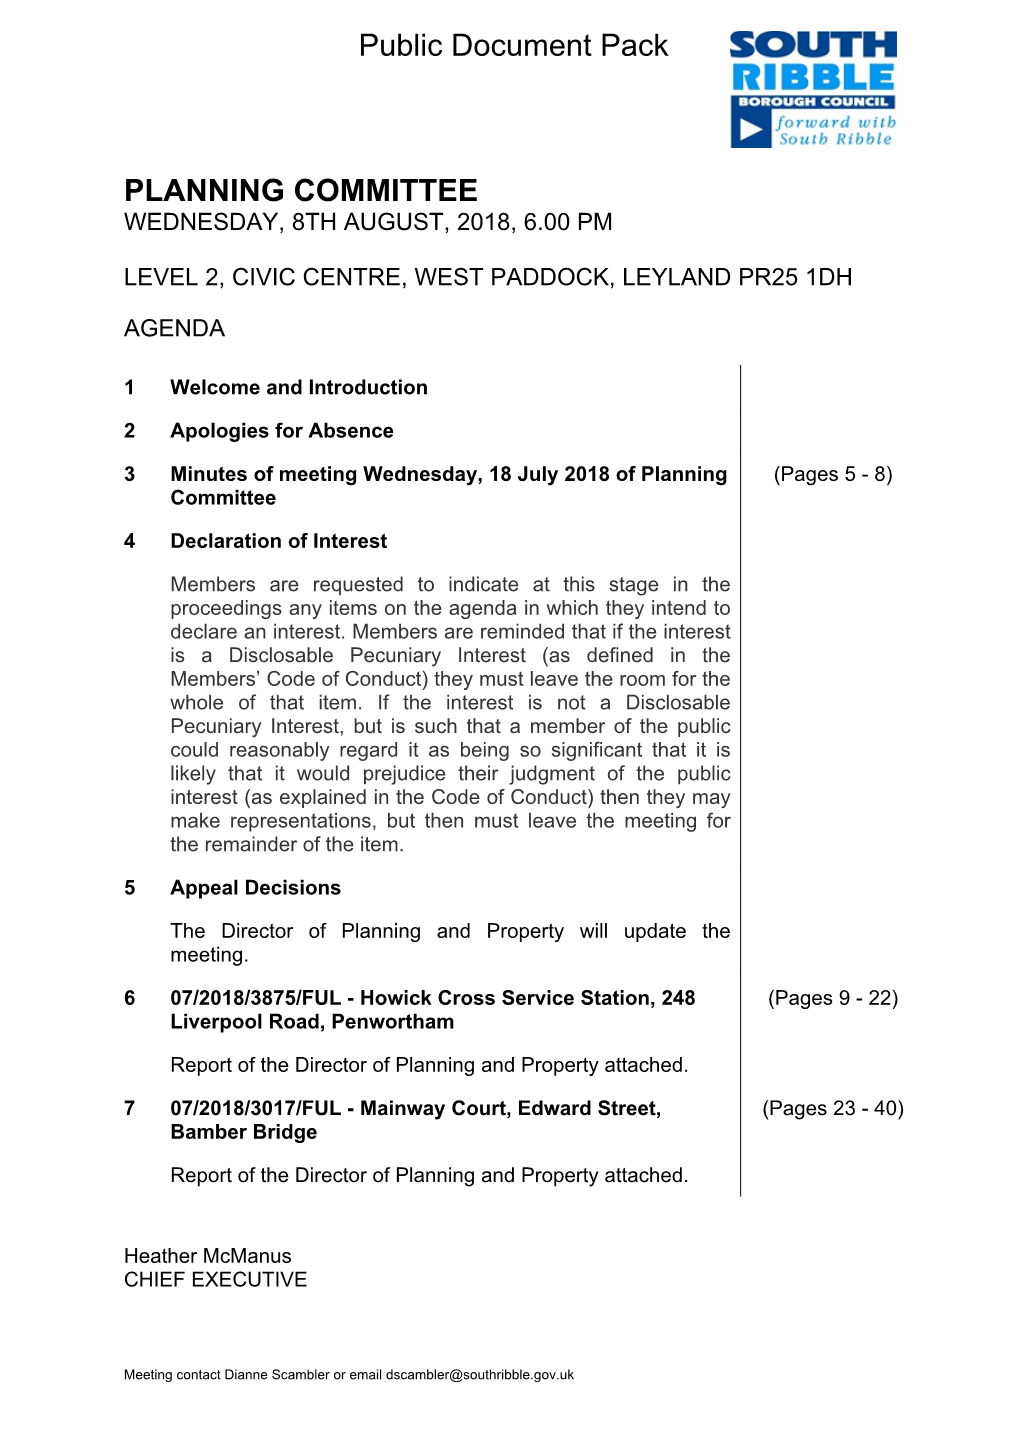 (Public Pack)Agenda Document for Planning Committee, 08/08/2018